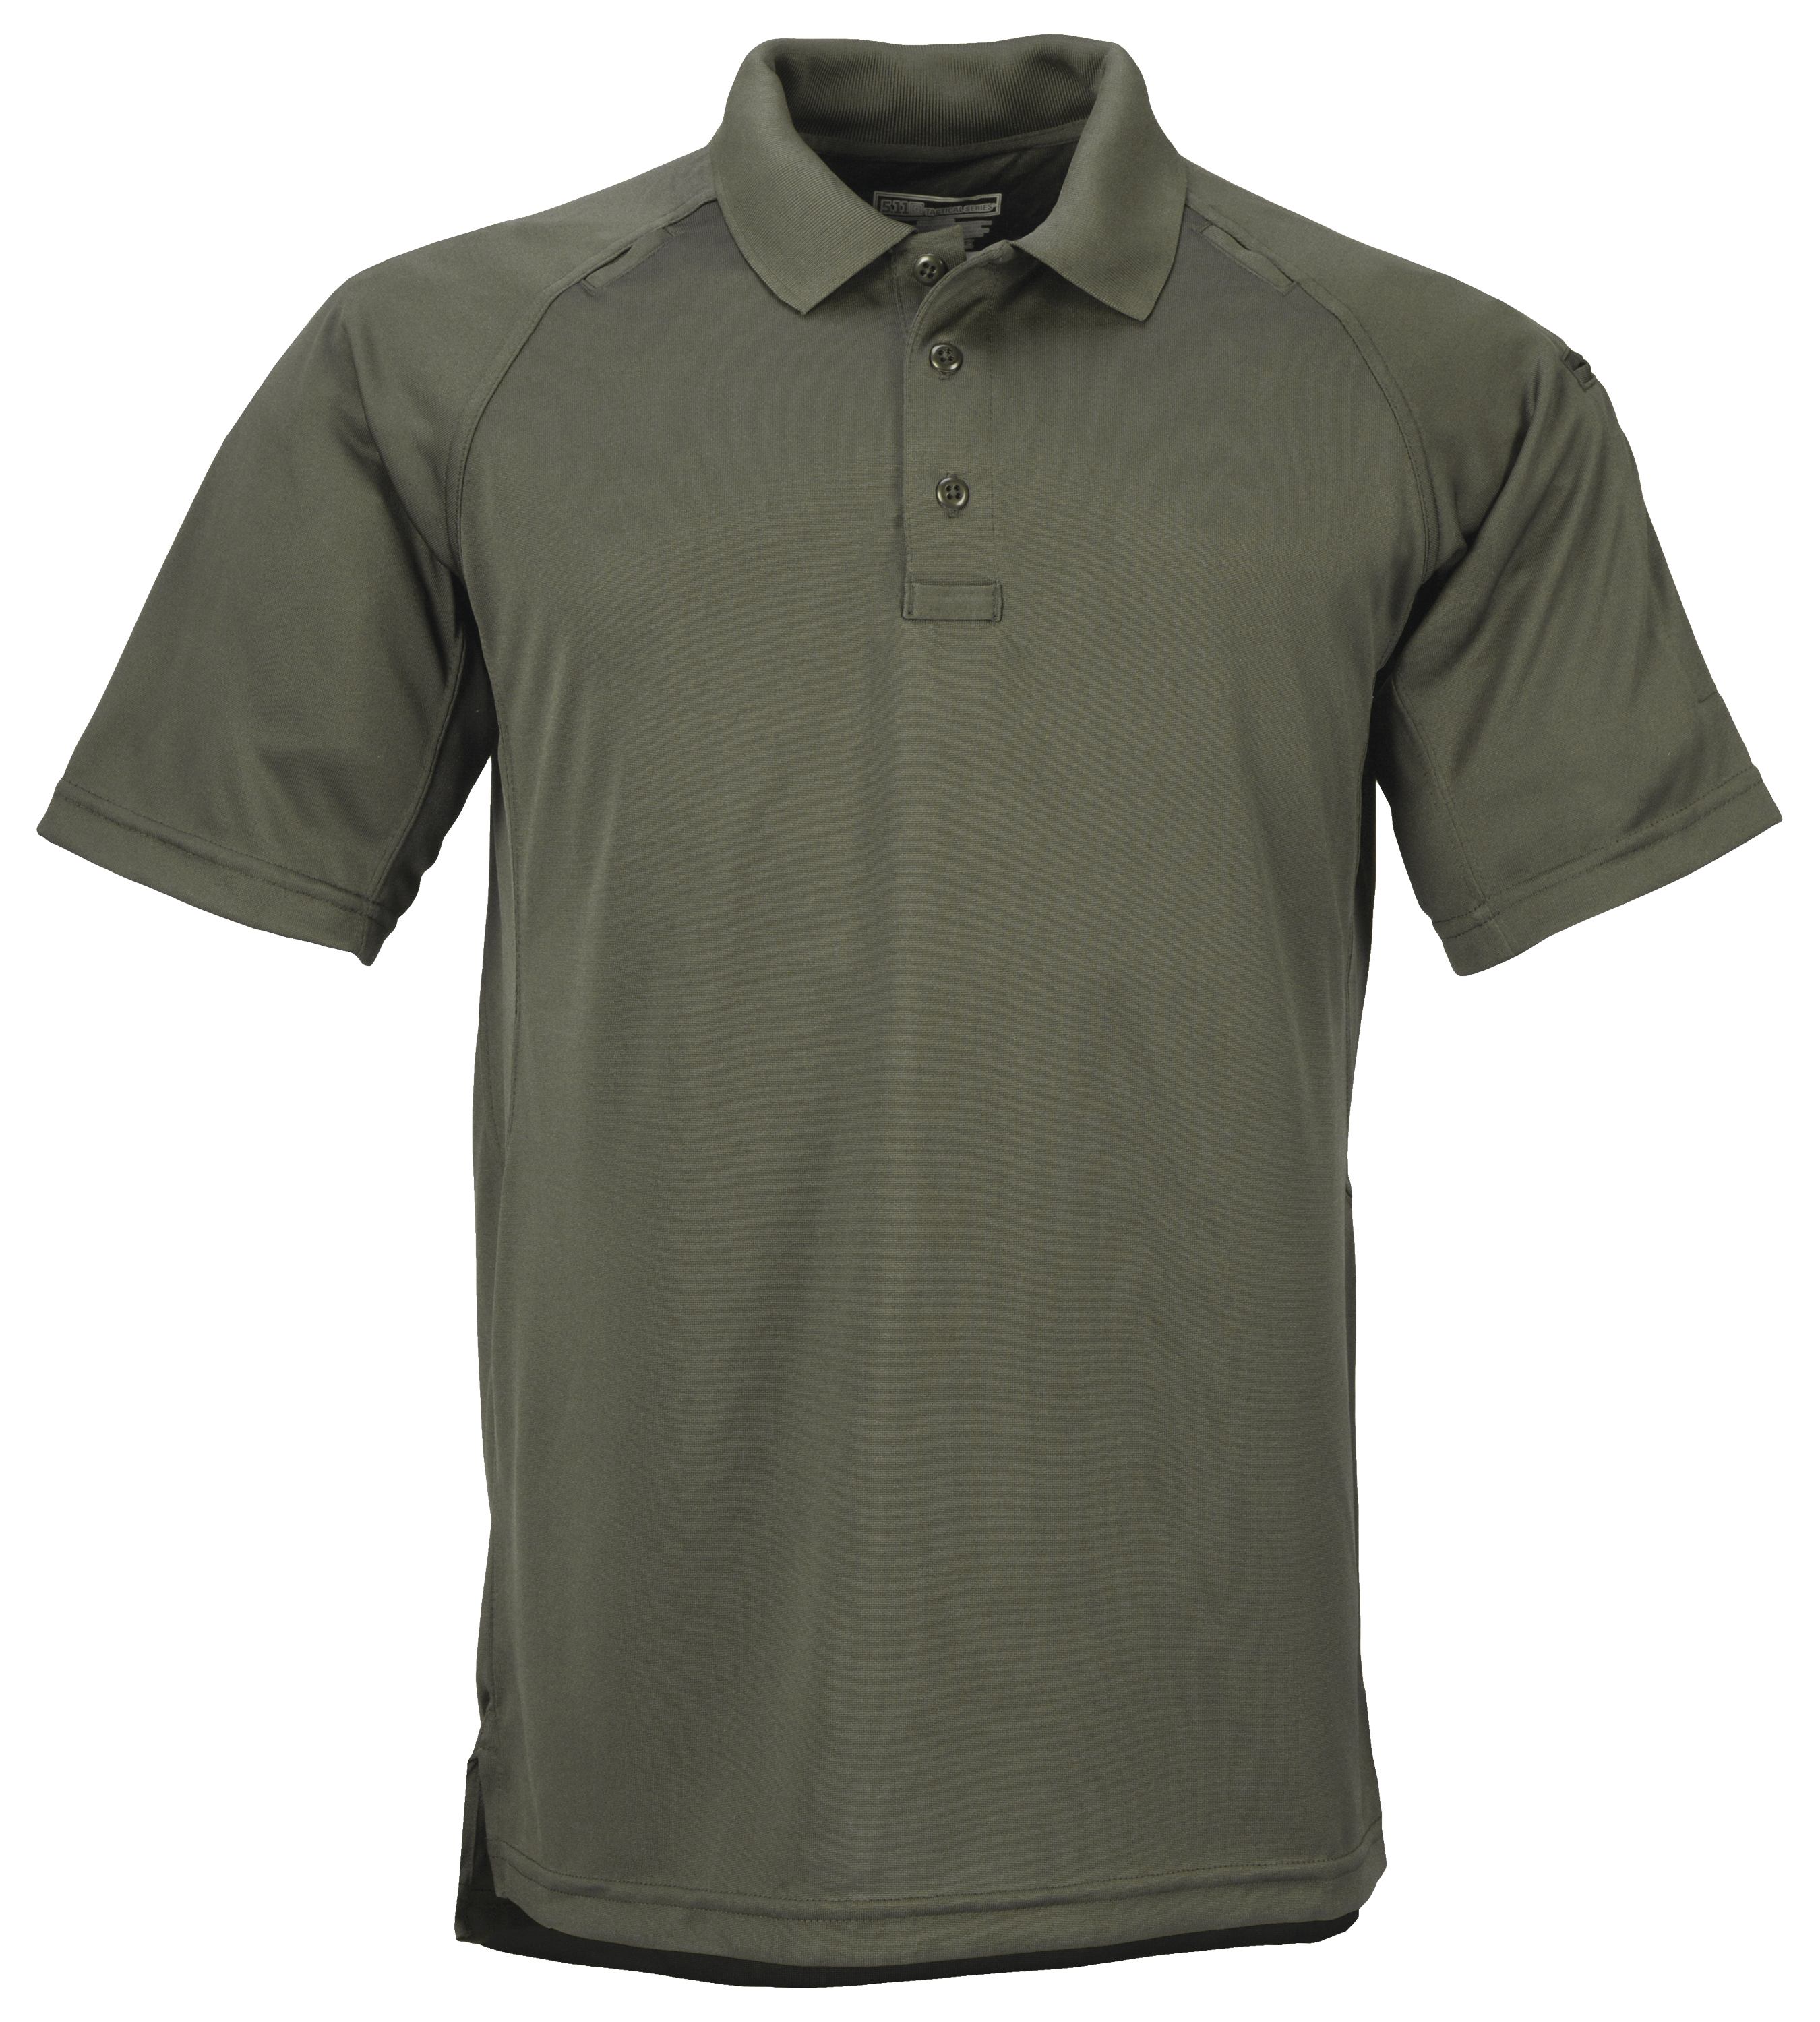 5.11 Tactical Synthetic Knit Performance Polo Short-Sleeve Shirt